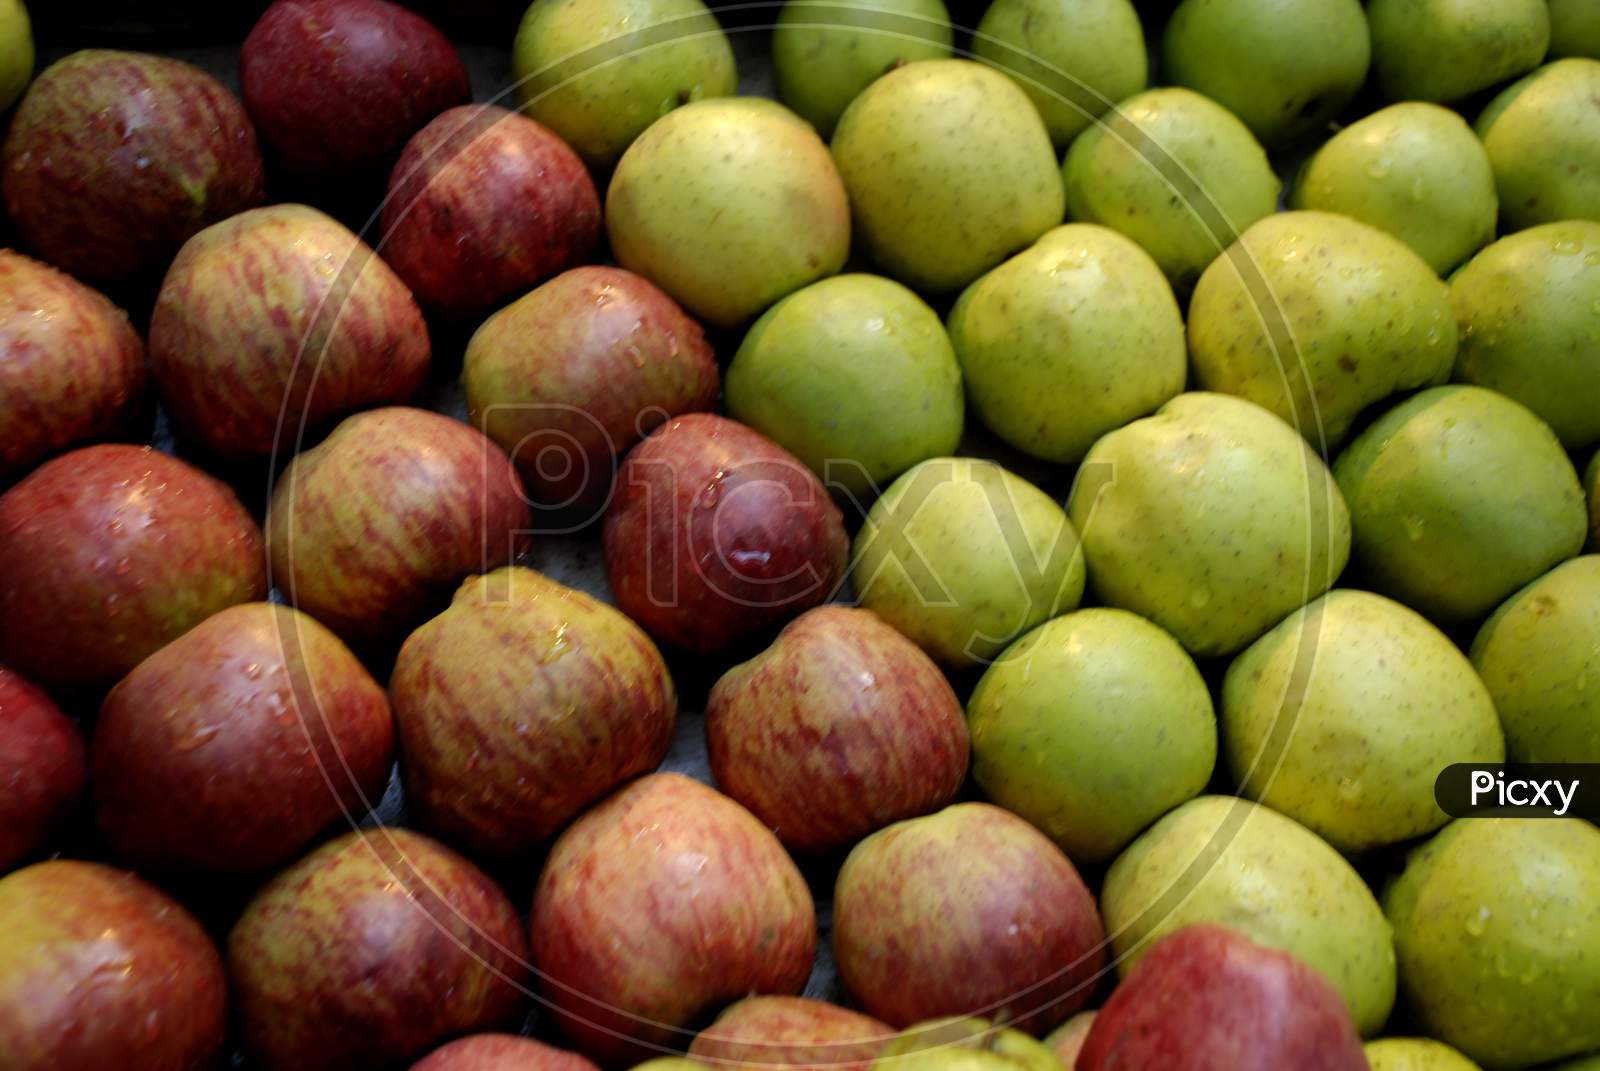 Apples Closeup In an Vendor Stall Forming a Background